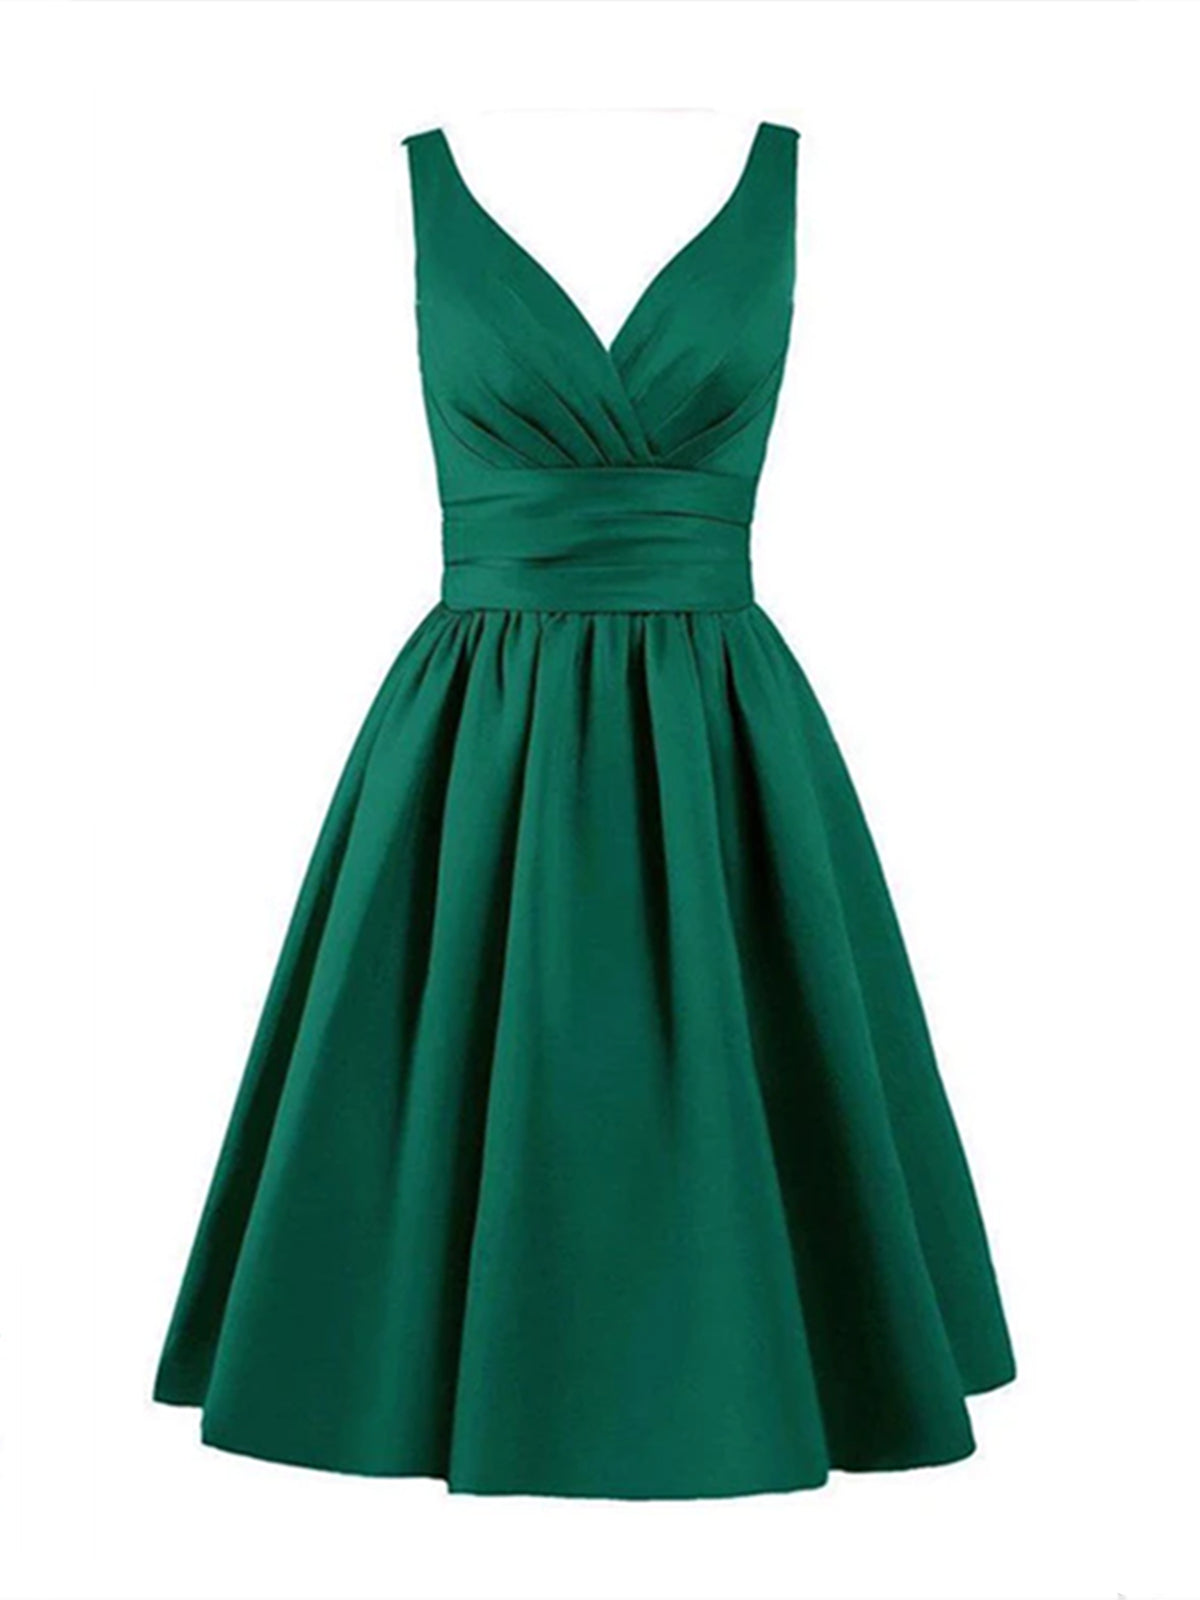 Party Dress Outfit, Short Green Satin Prom Dresses, Short Green Satin Graduation Homecoming Dresses